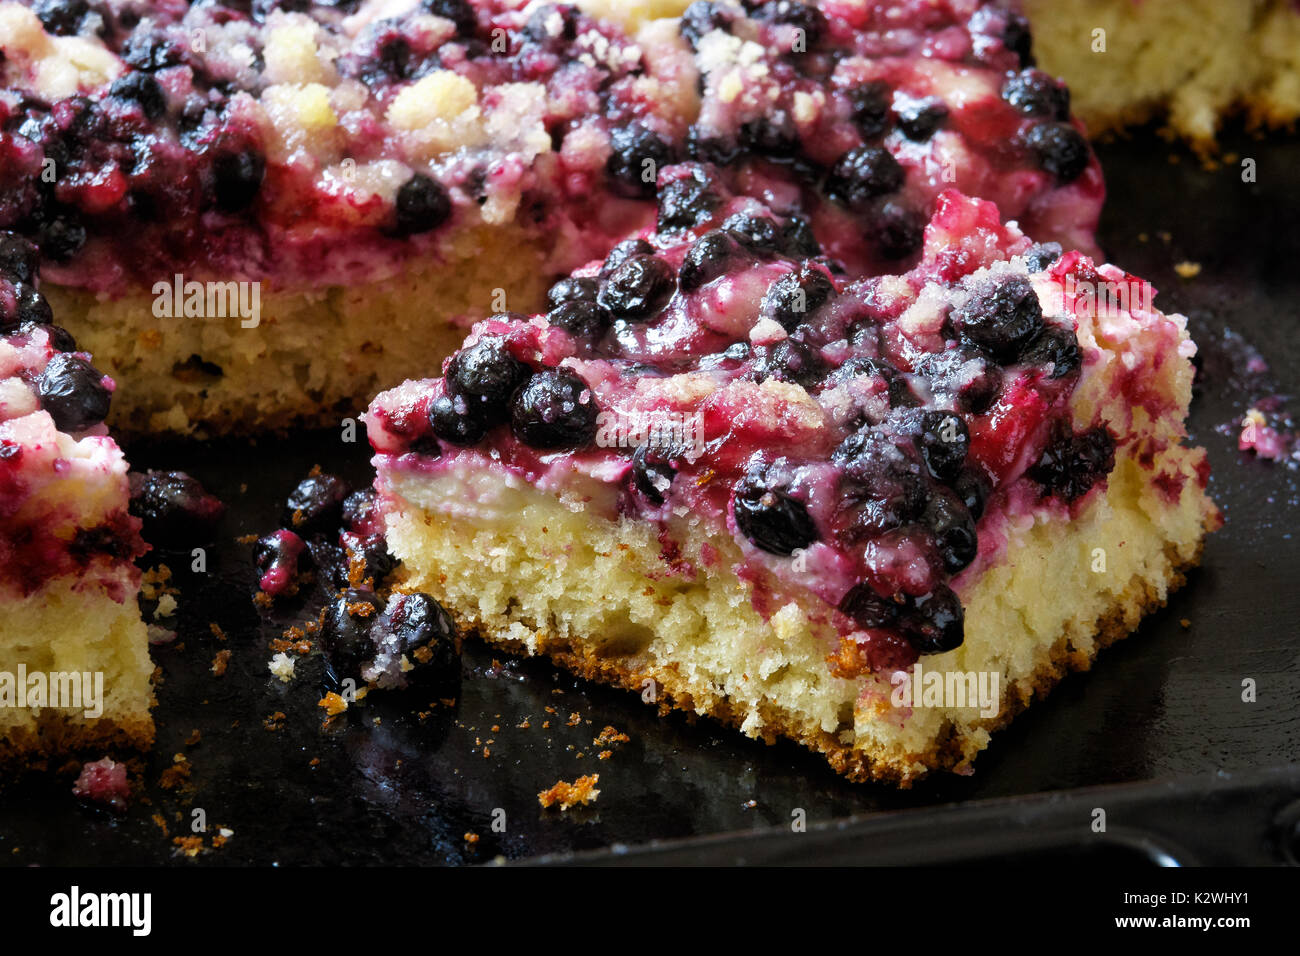 Homemade fruit and curd cheese kolach on baking tray. Stock Photo